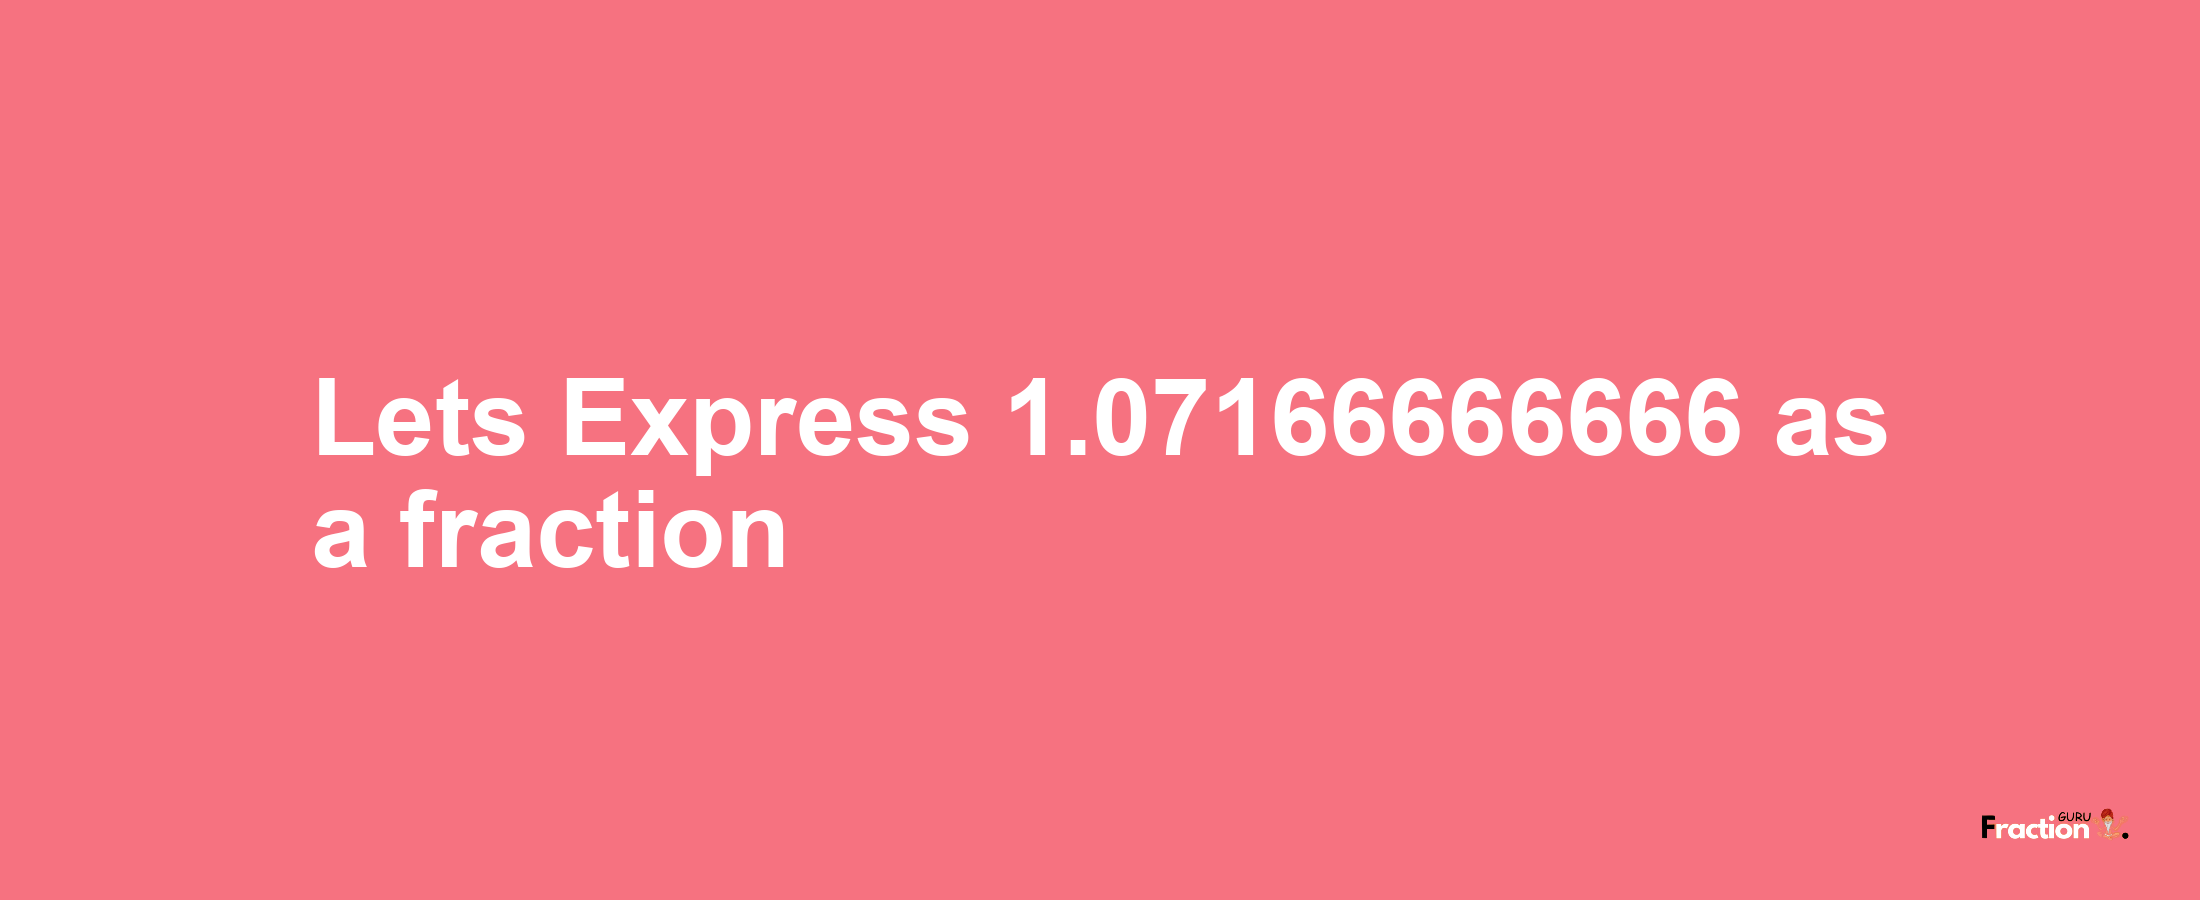 Lets Express 1.07166666666 as afraction